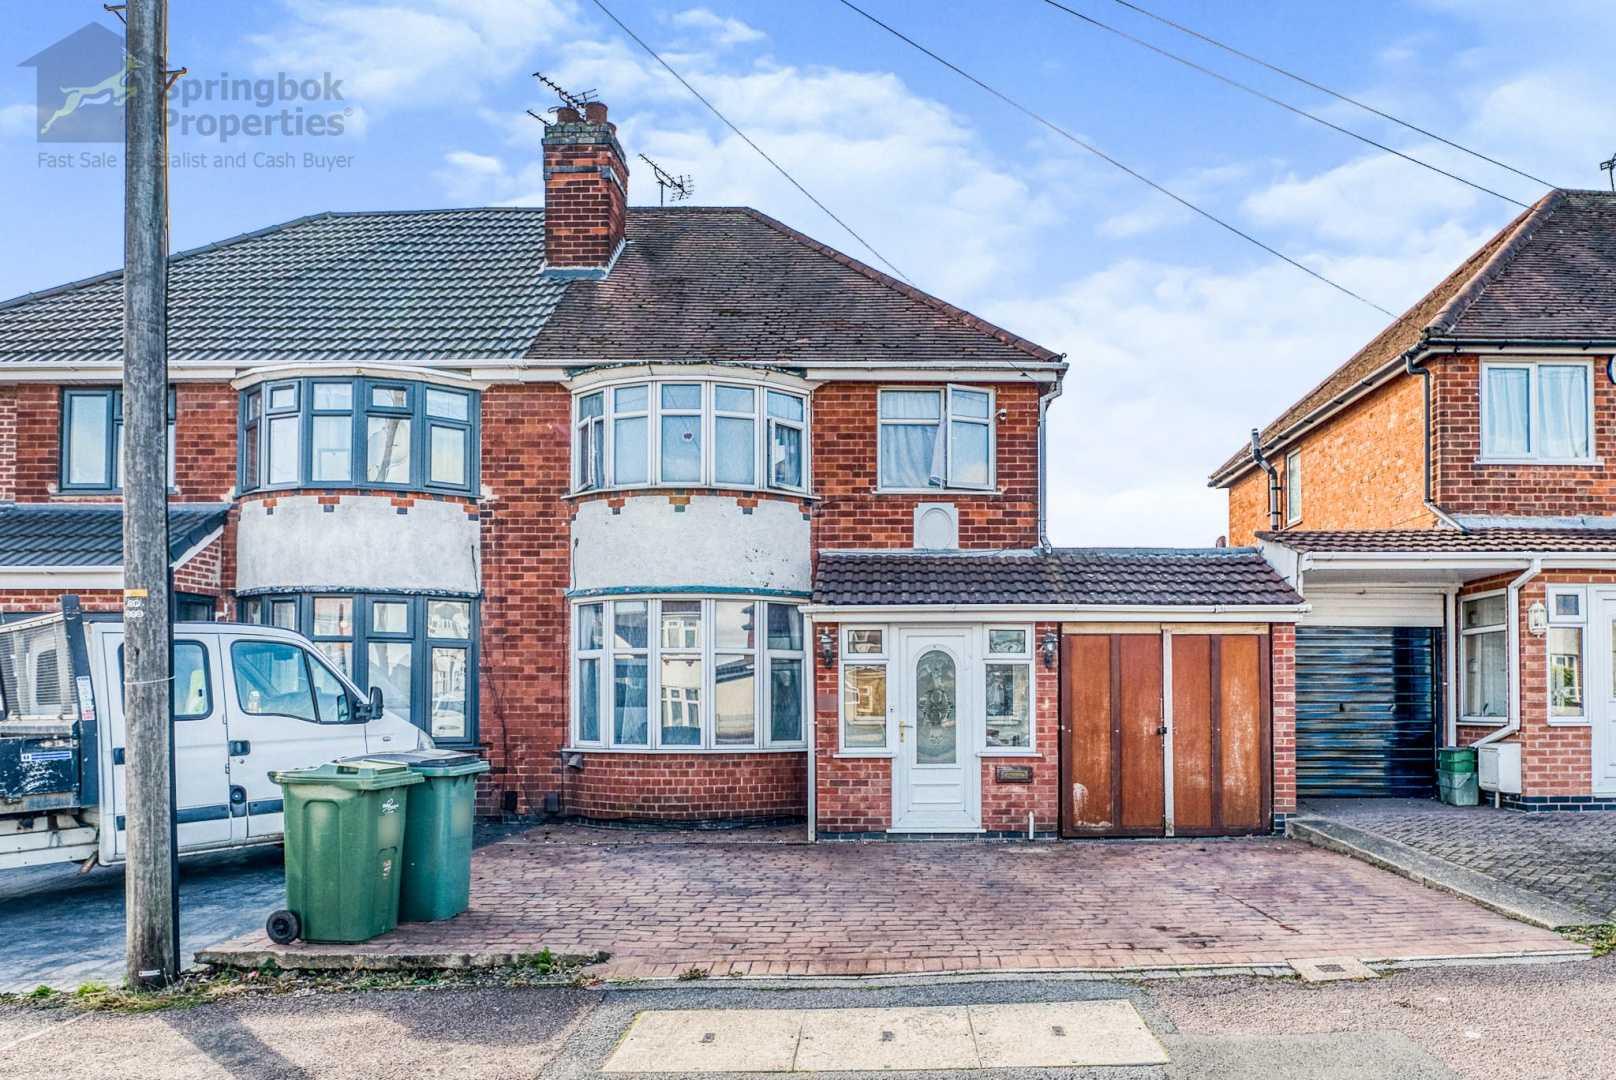 House in Braunstone, Leicestershire 11125799